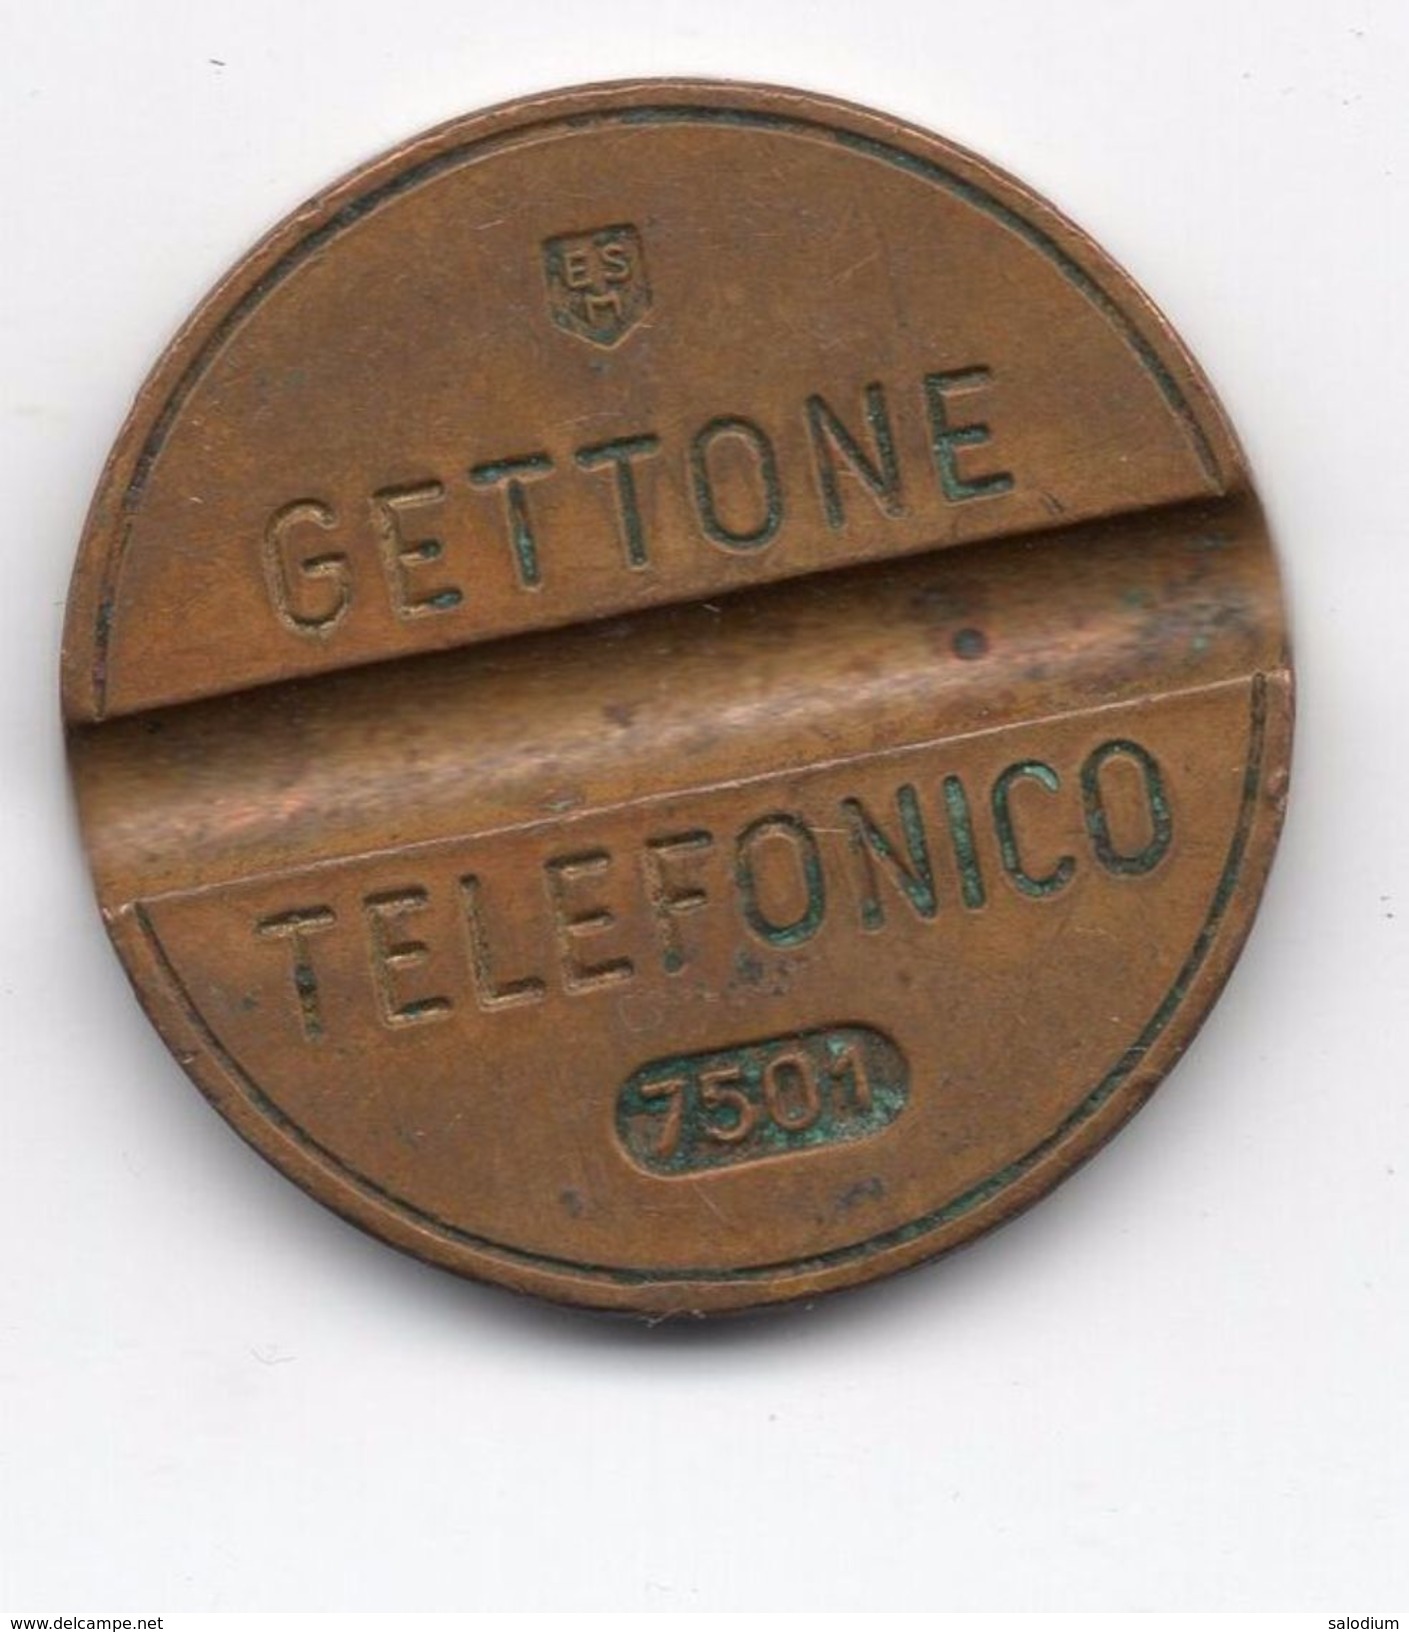 Gettone Telefonico 7501 Token Telephone - (Id-778) - Professionals/Firms